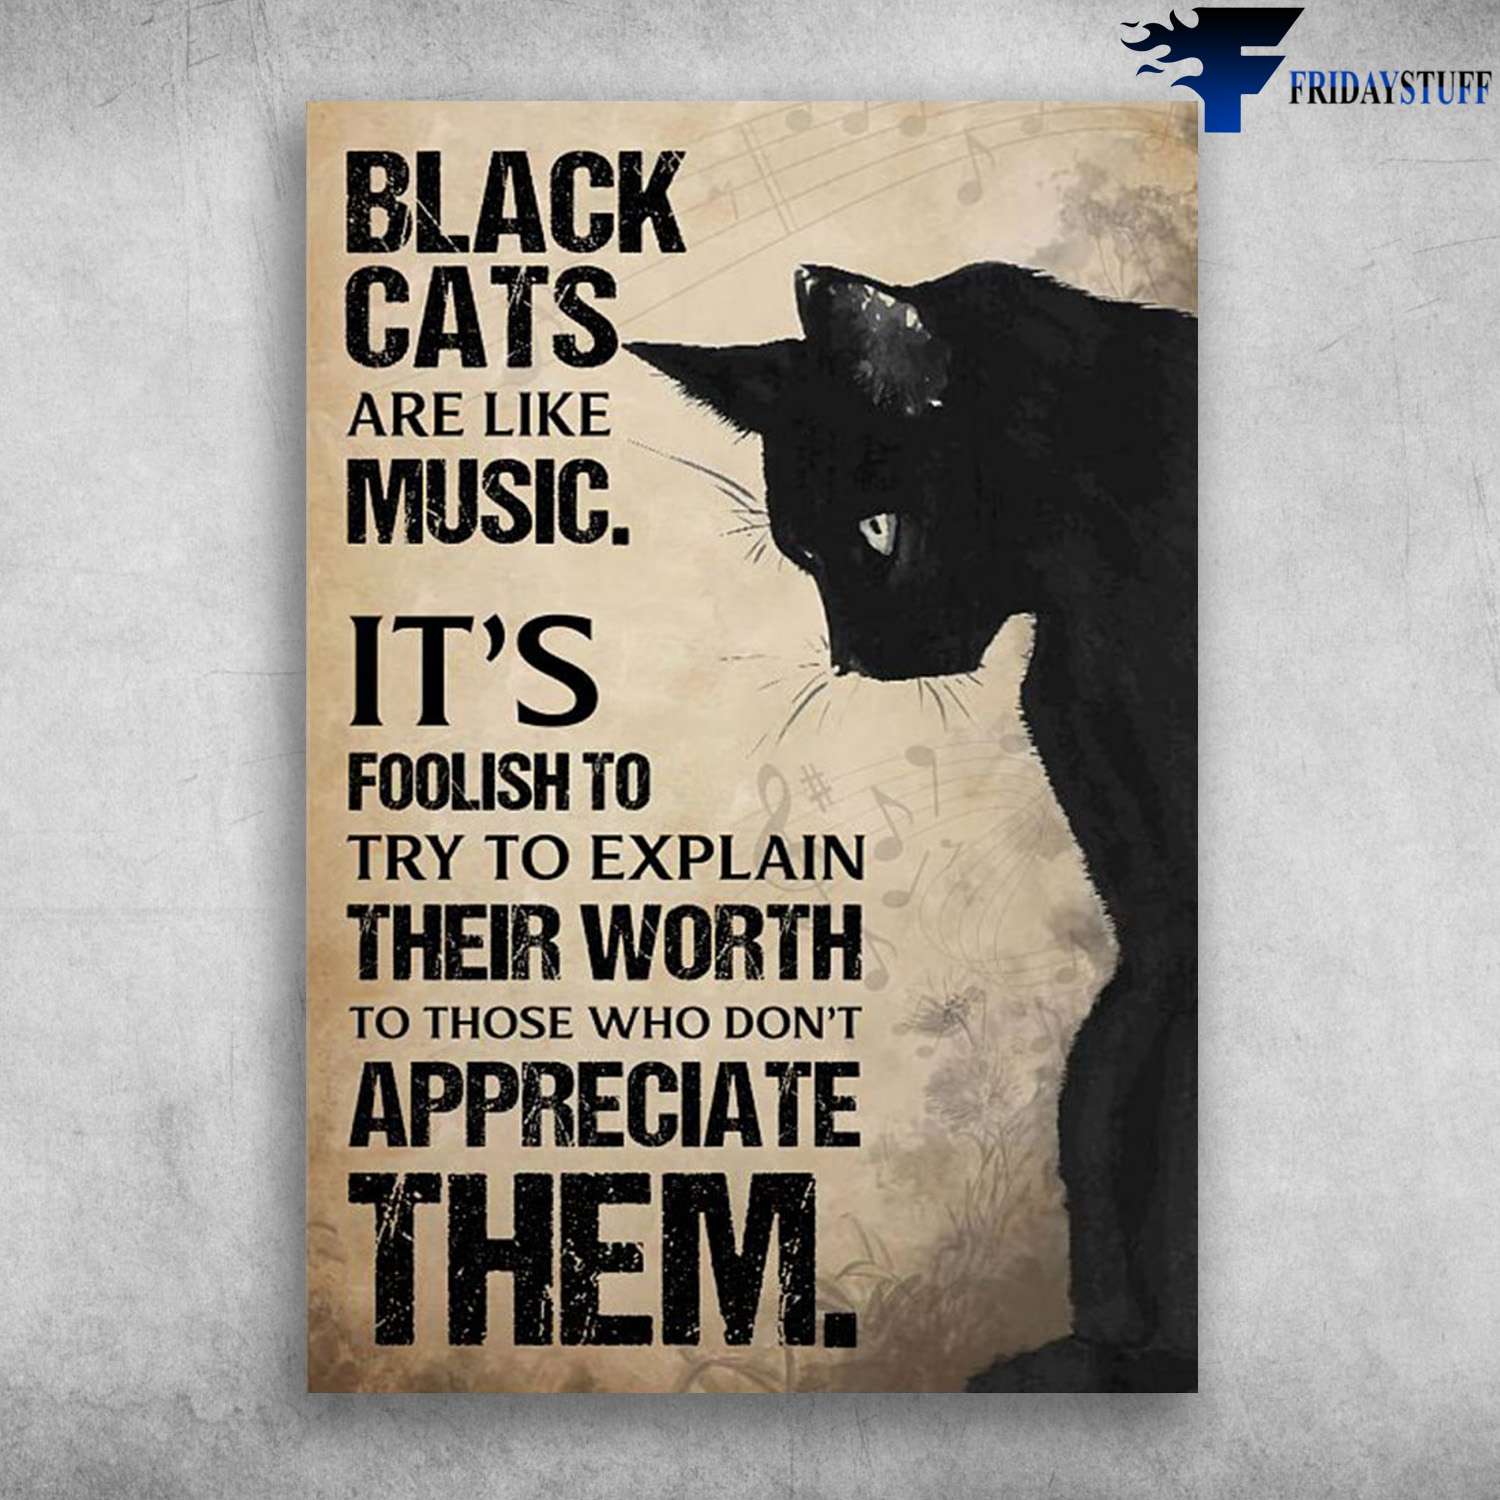 Black Cat - Black Cats Are Like Music, It's Foolish To Try Explain, Their Worth To Those, Who Don't Appreciate Them